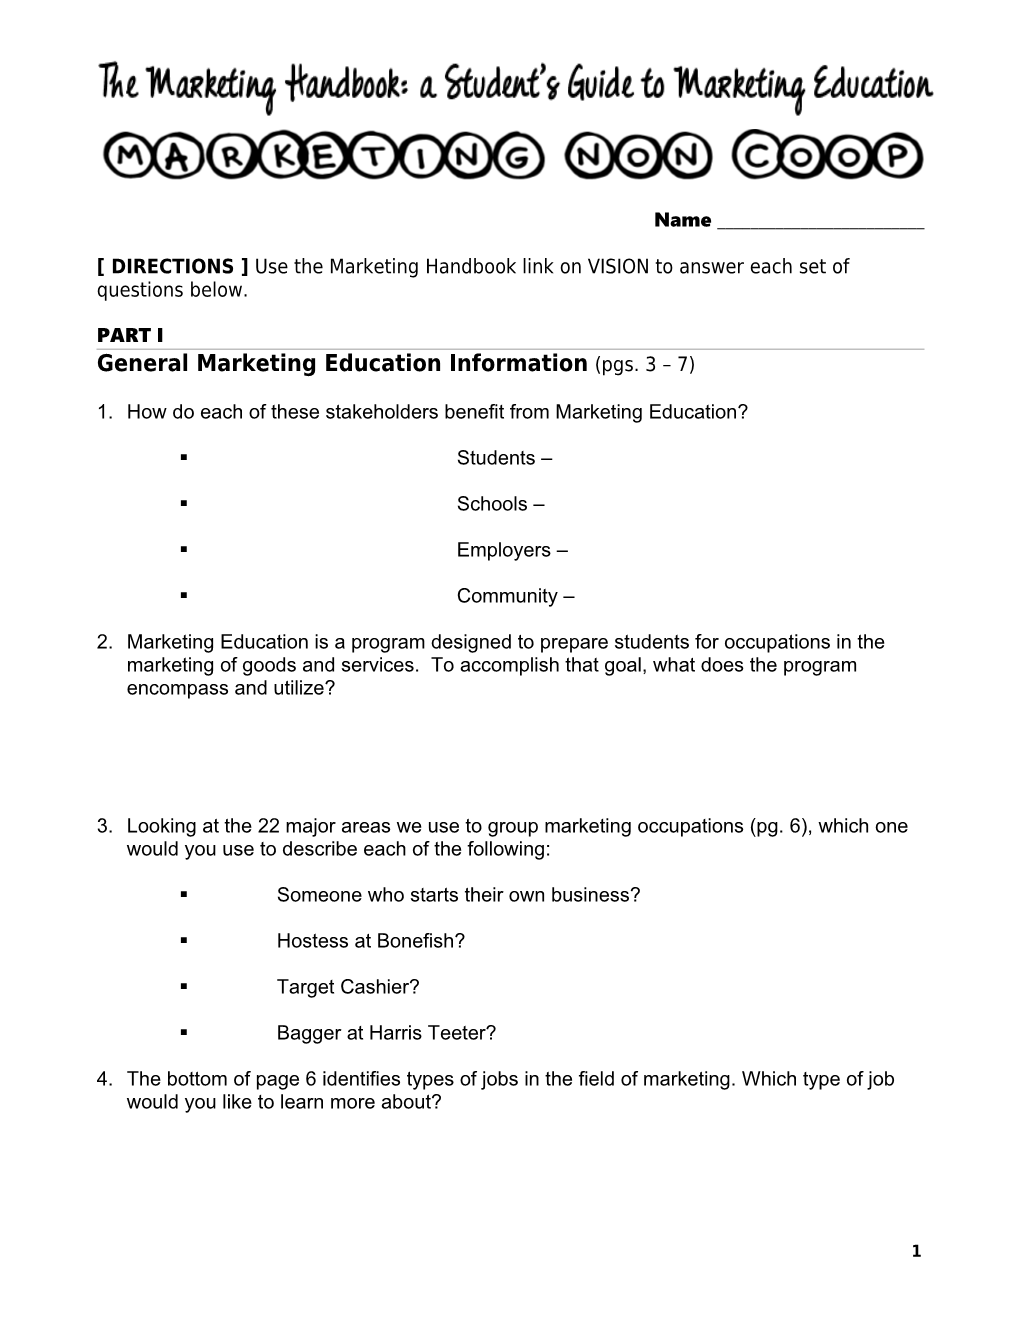 General Marketing Education Information (Pgs. 3 7)